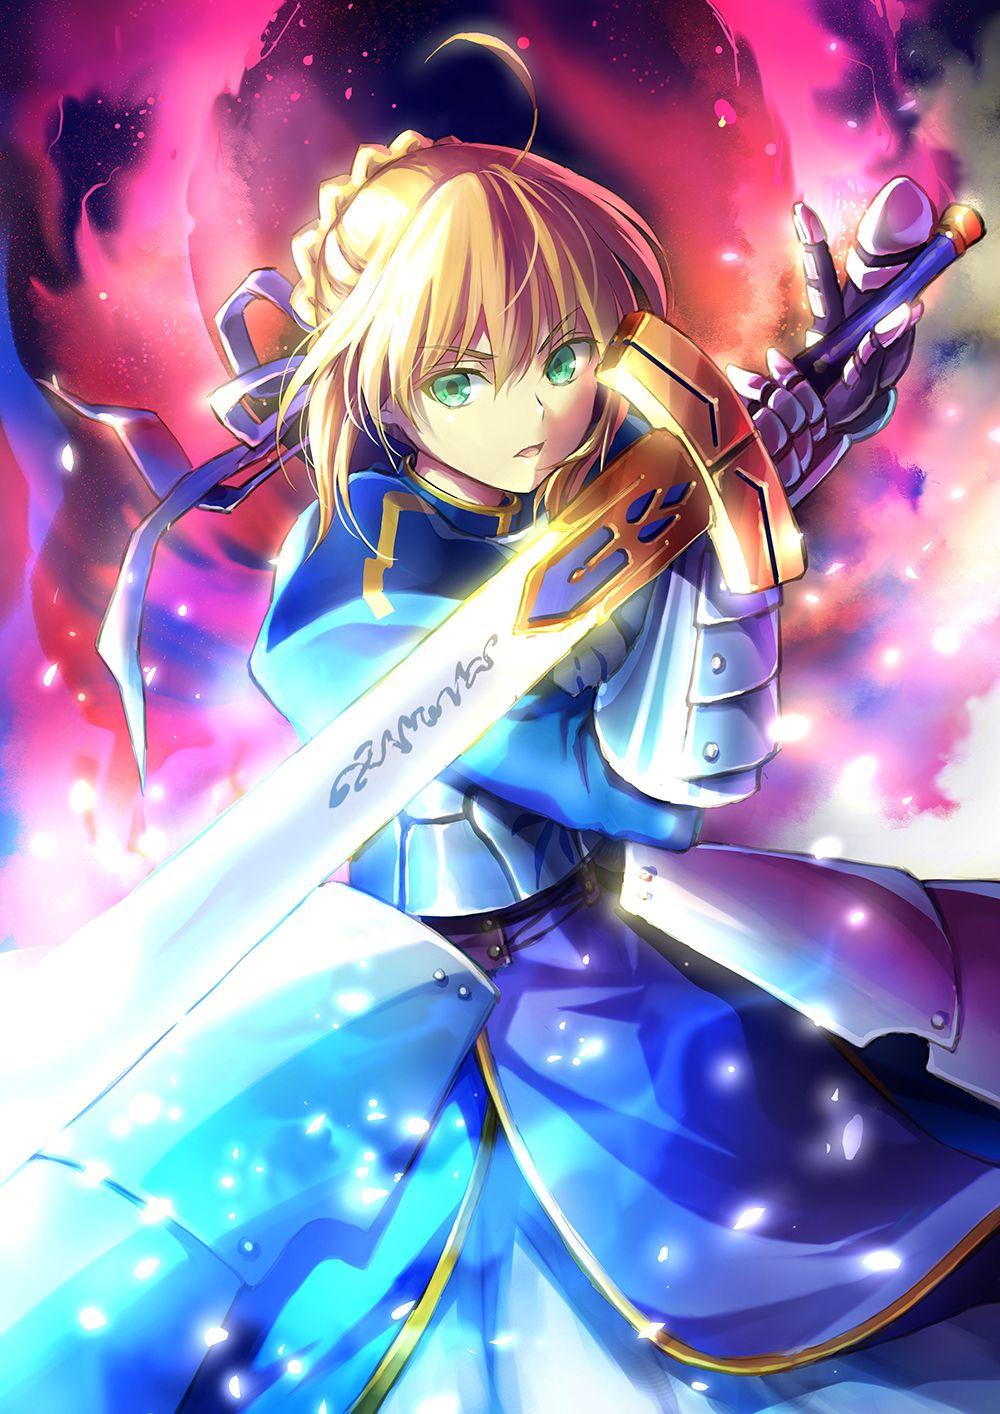 Saber Fate Stay Night Wallpapers Top Free Saber Fate Stay Night Backgrounds Wallpaperaccess